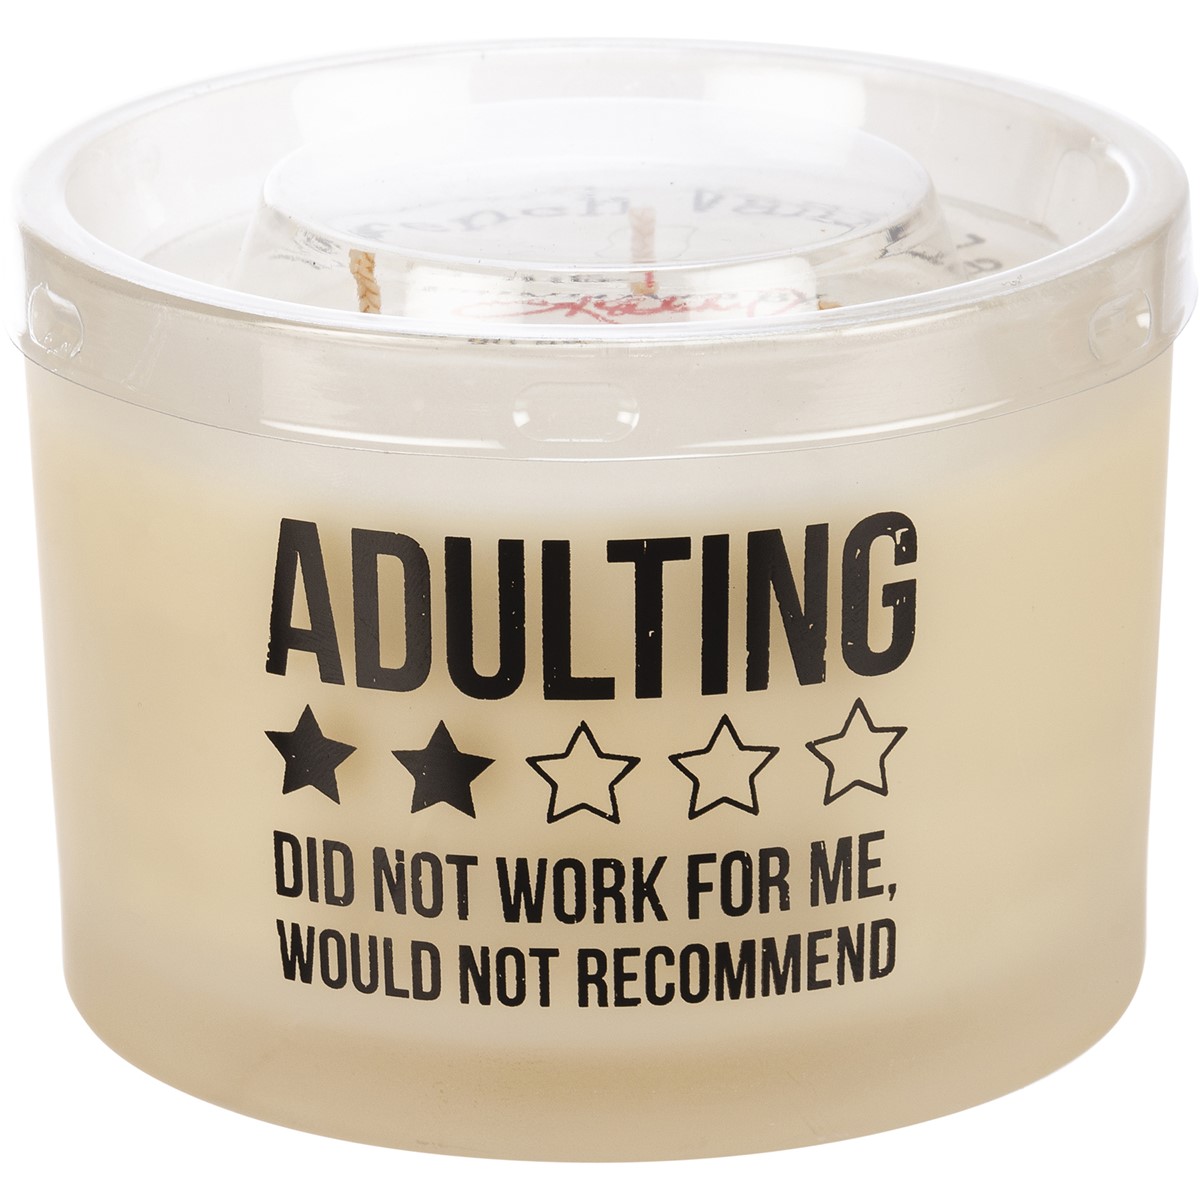 Adulting Did Not Work For Me Candle - Soy Wax, Glass, Cotton